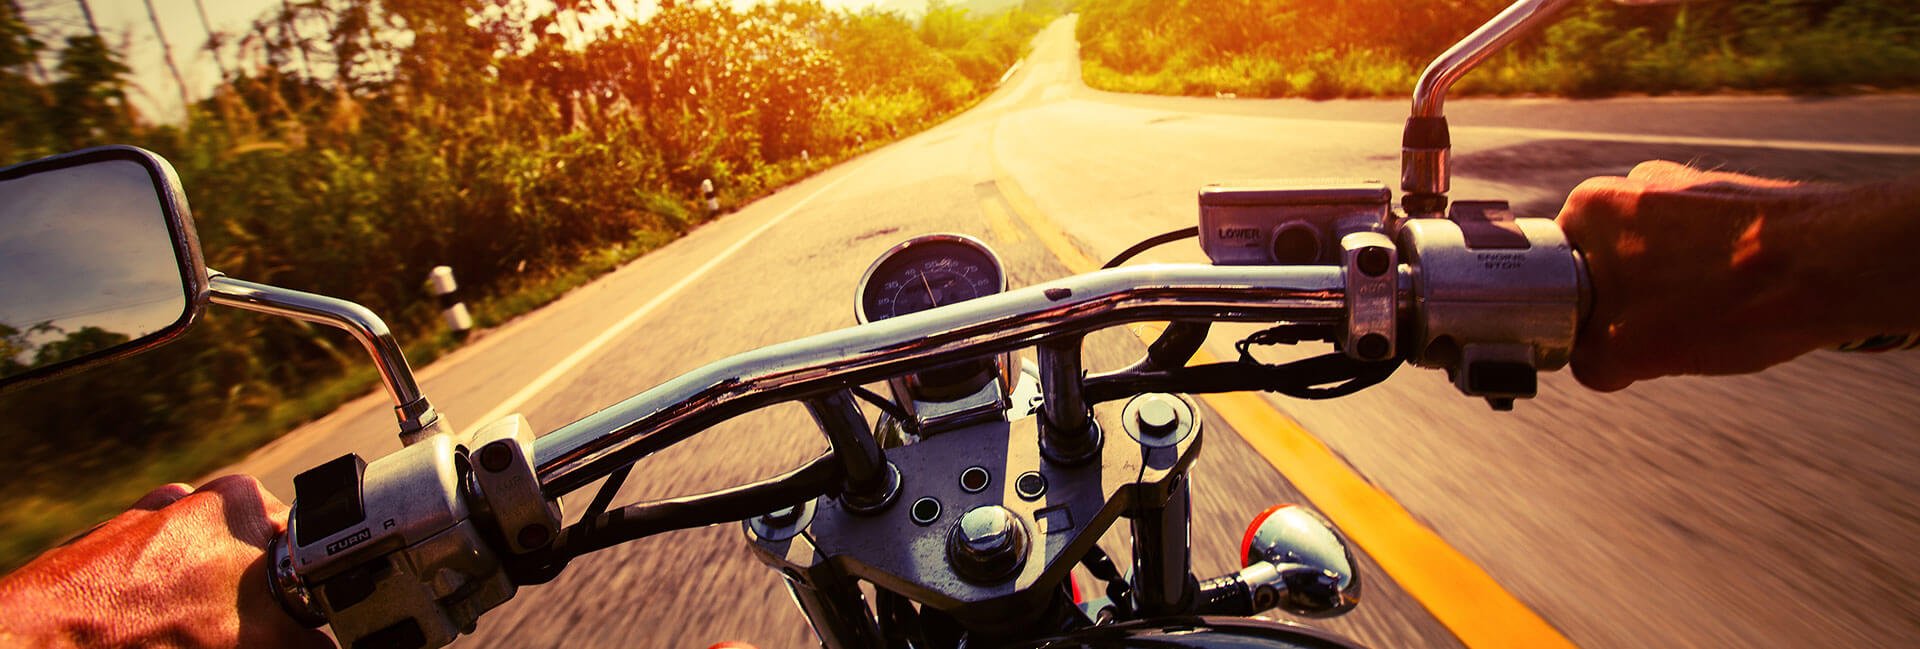 Have You Been Involved In A Motorcycle Accident?